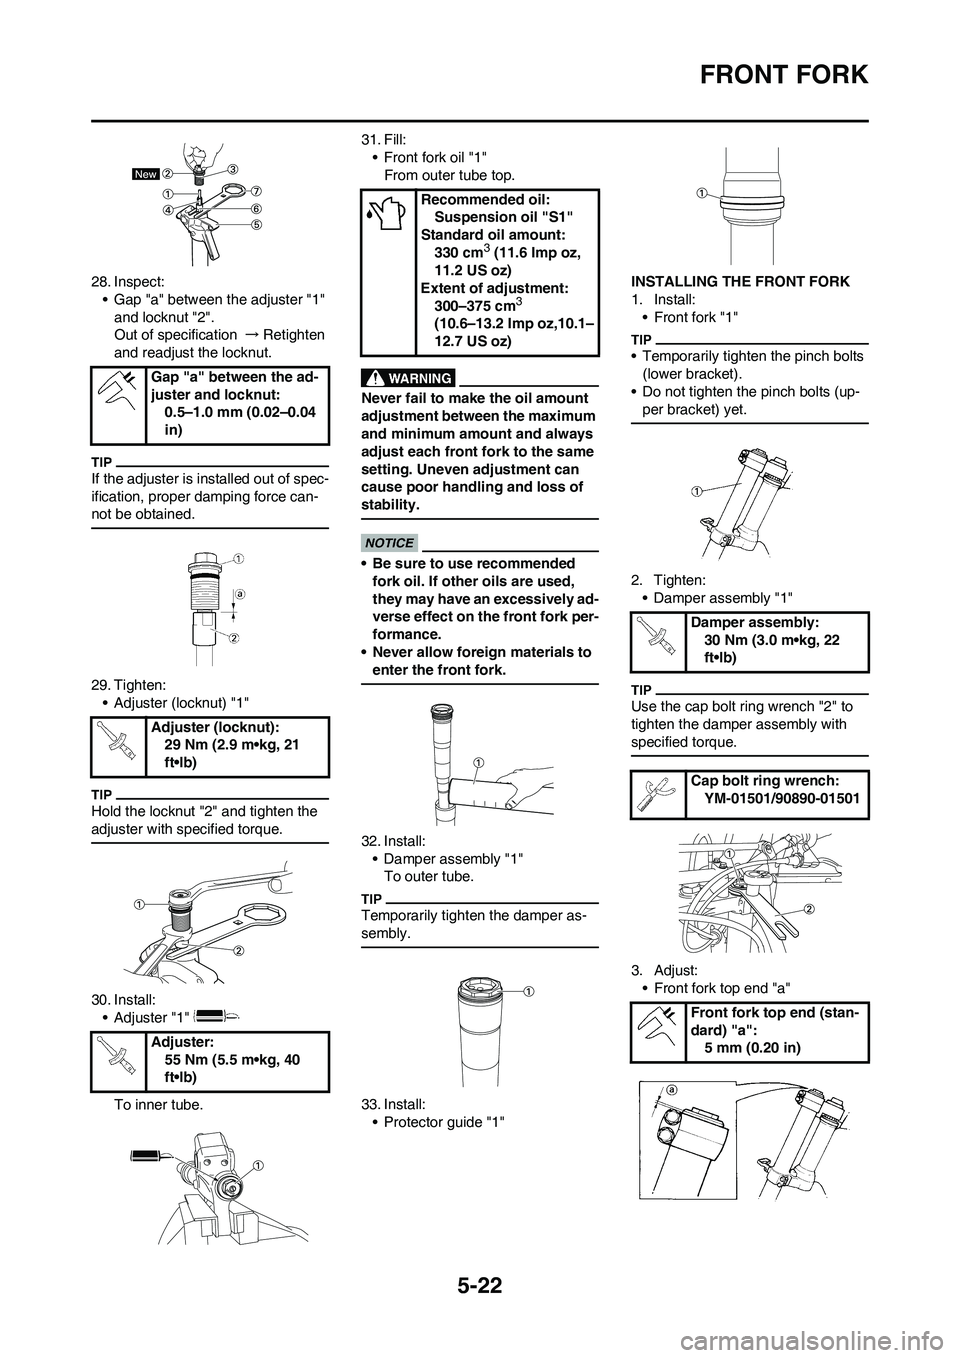 YAMAHA YZ250F 2009  Owners Manual 5-22
FRONT FORK
28. Inspect:
• Gap "a" between the adjuster "1" 
and locknut "2".
Out of specification → Retighten 
and readjust the locknut.
If the adjuster is installed out of spec-
ification, p